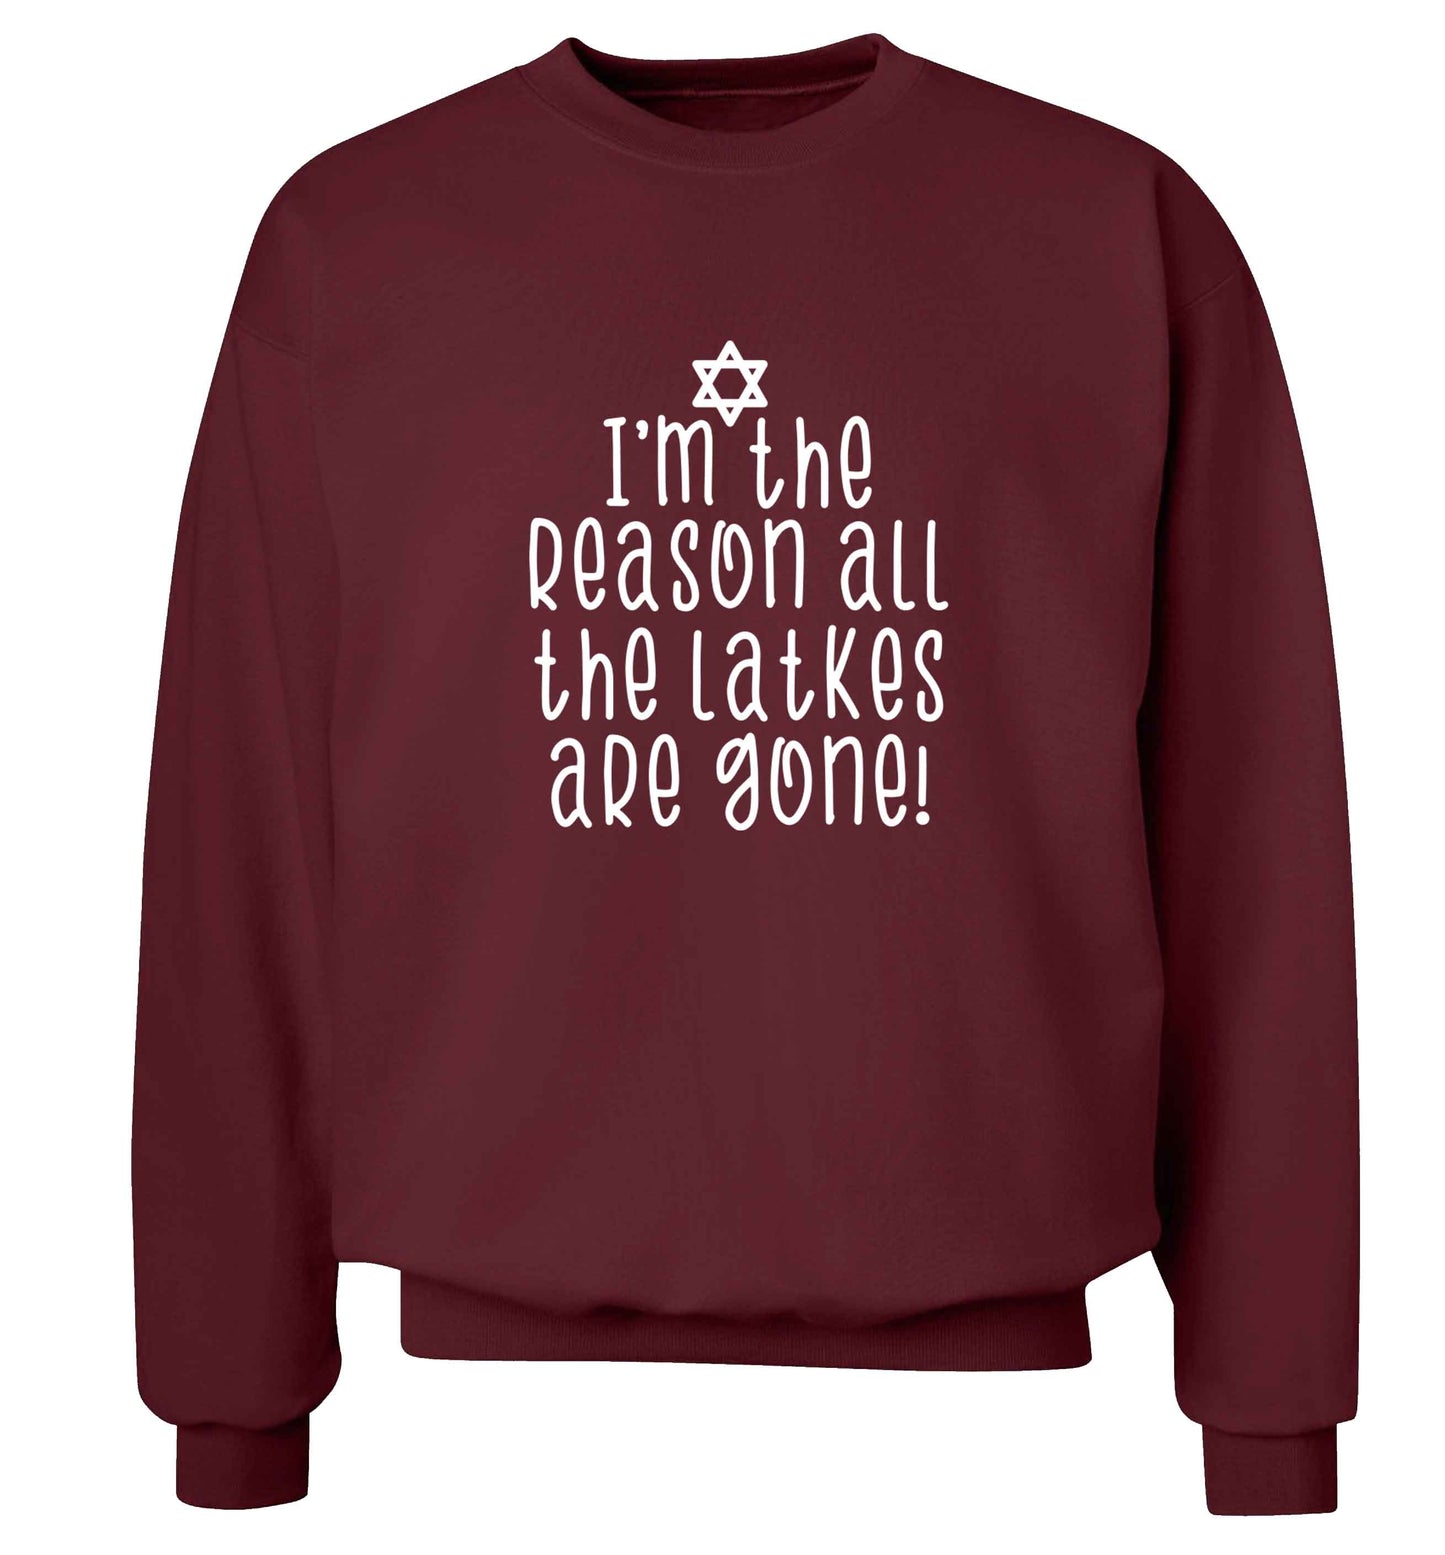 I'm the reason all the latkes are gone adult's unisex maroon sweater 2XL